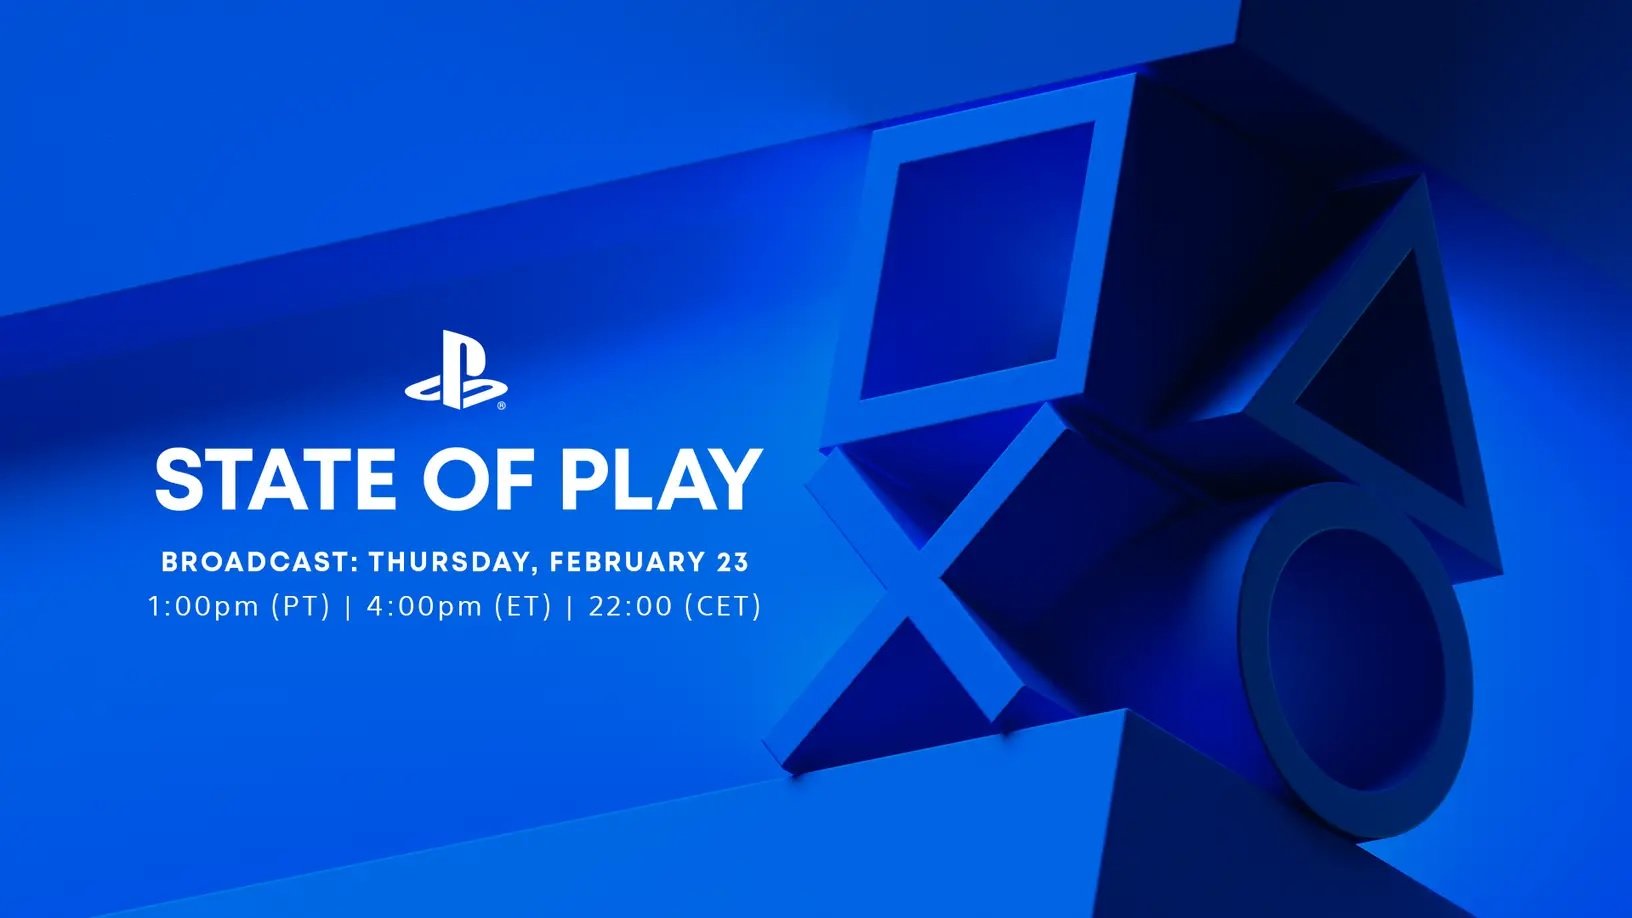 How to watch the PlayStation State of Play live stream
today